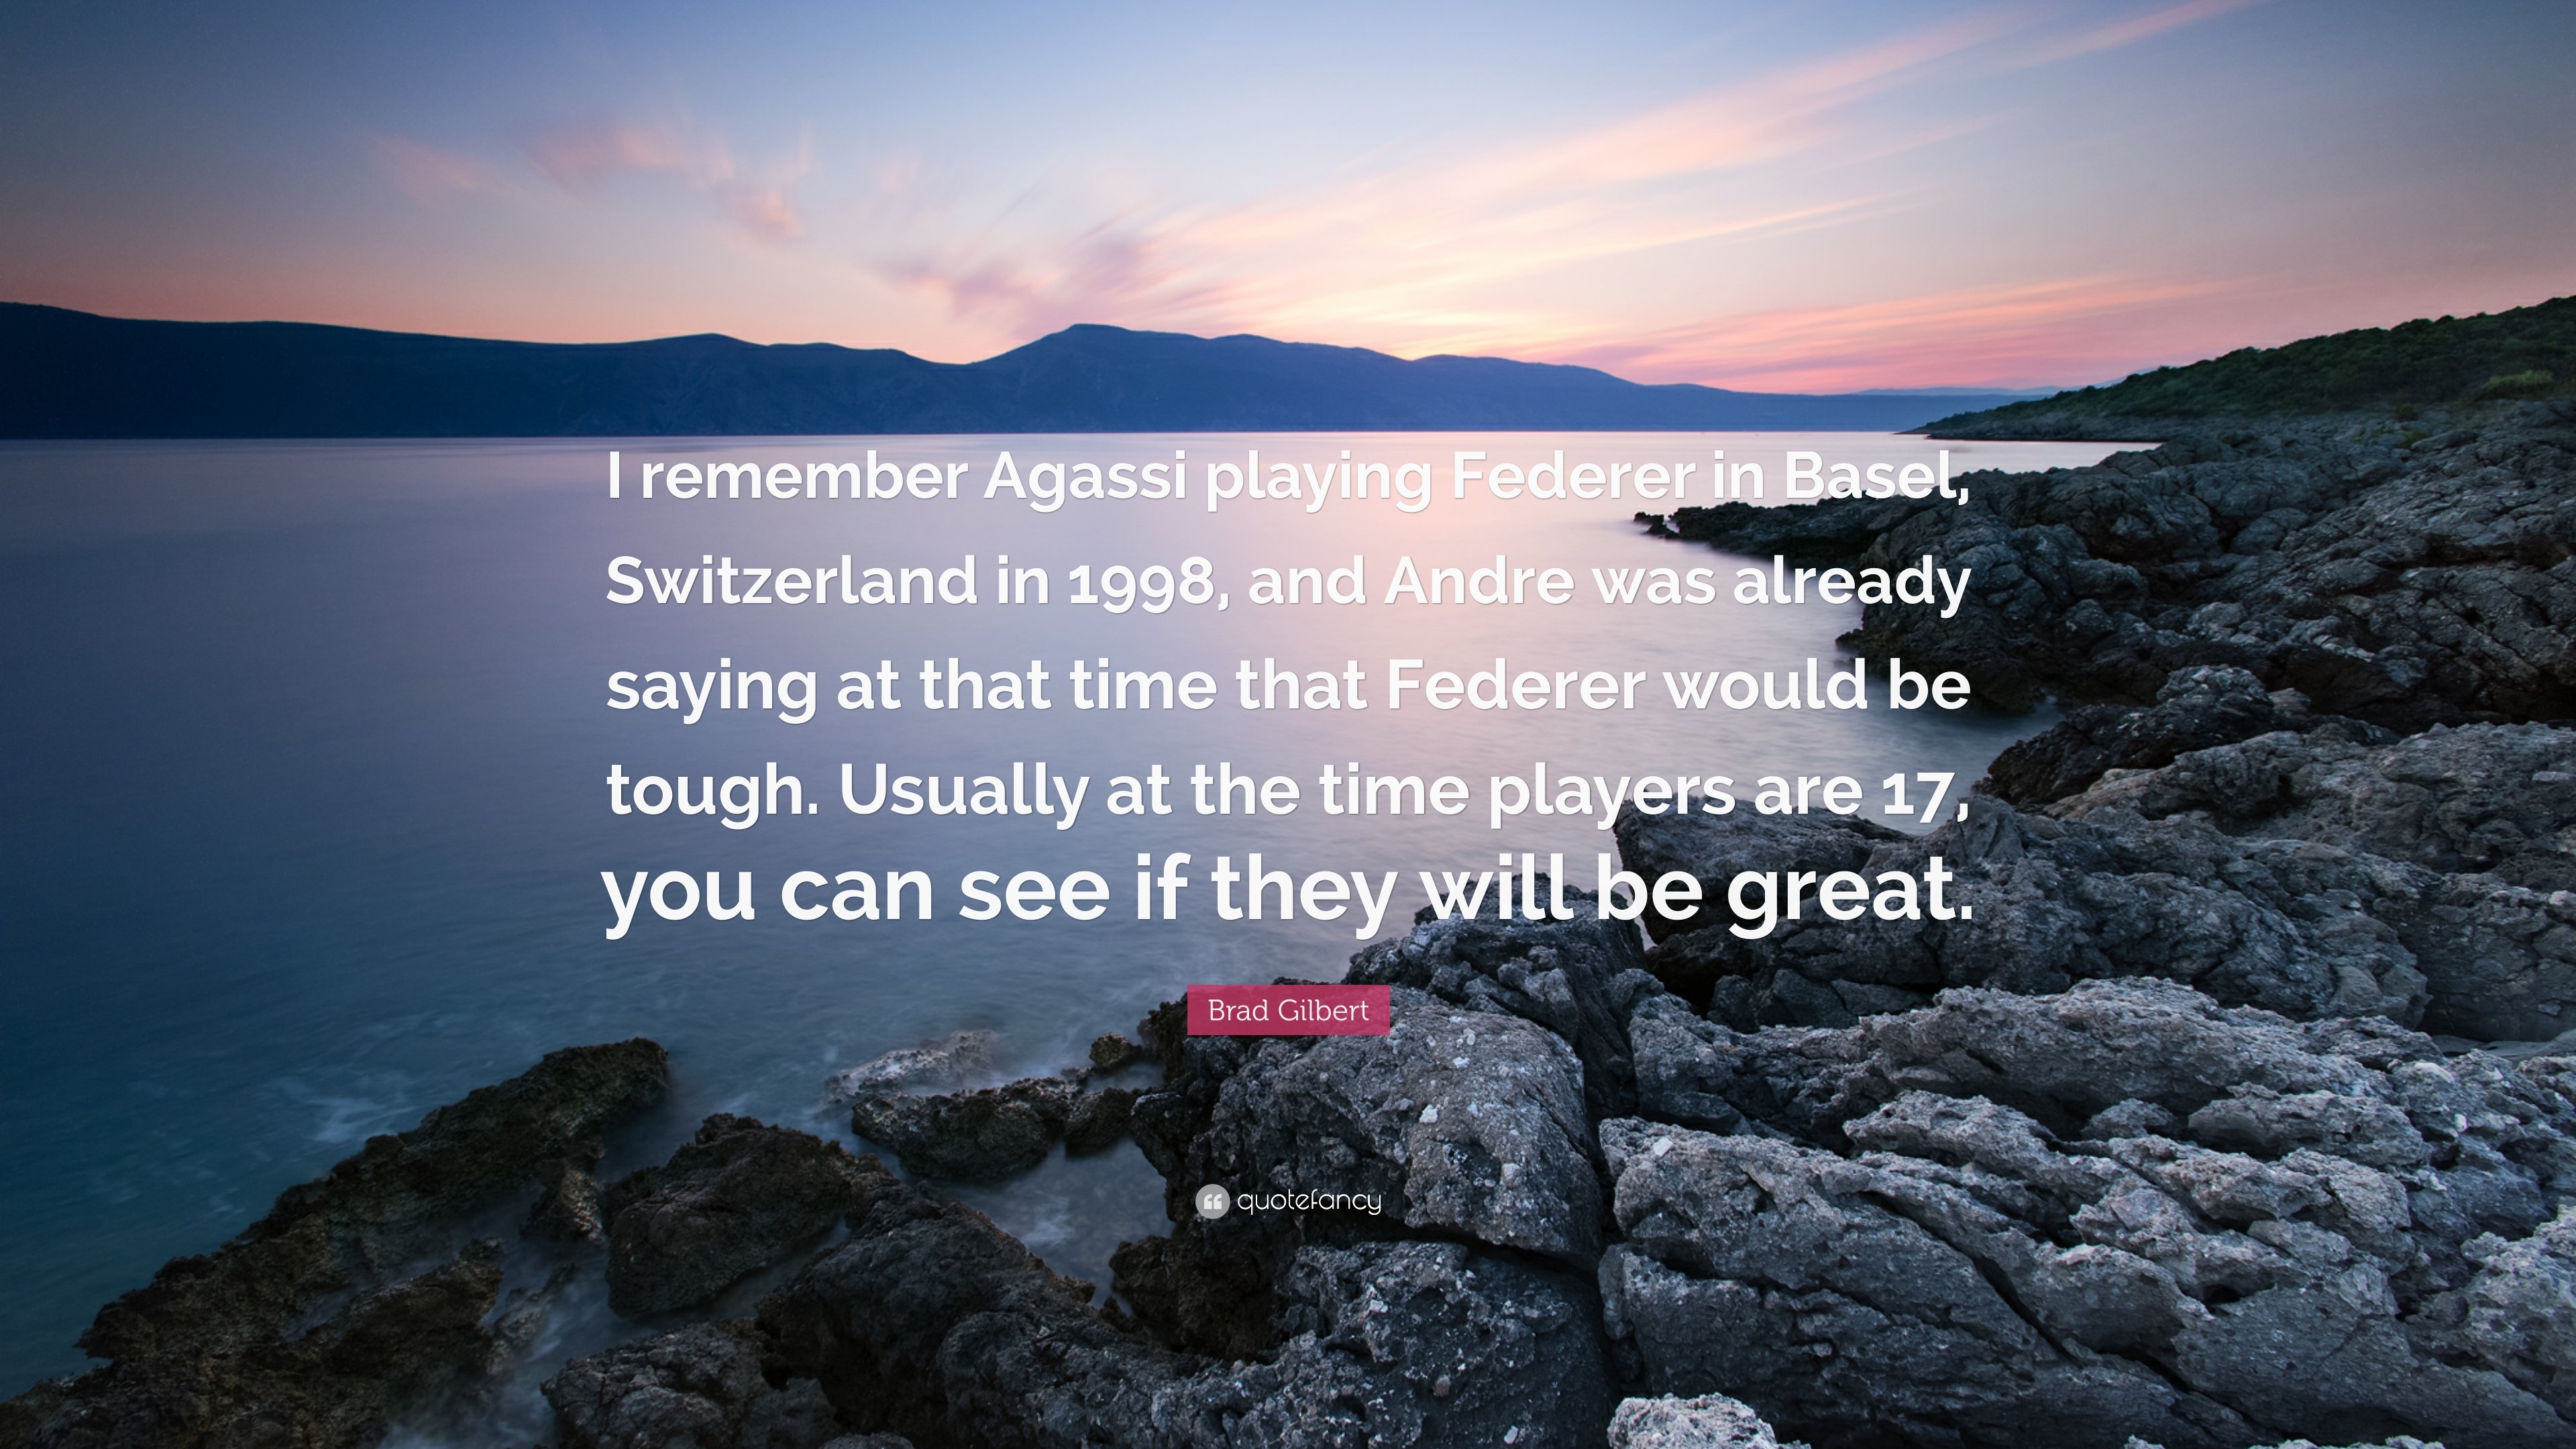 Brad Gilbert Quote: “I remember Agassi playing Federer in Basel